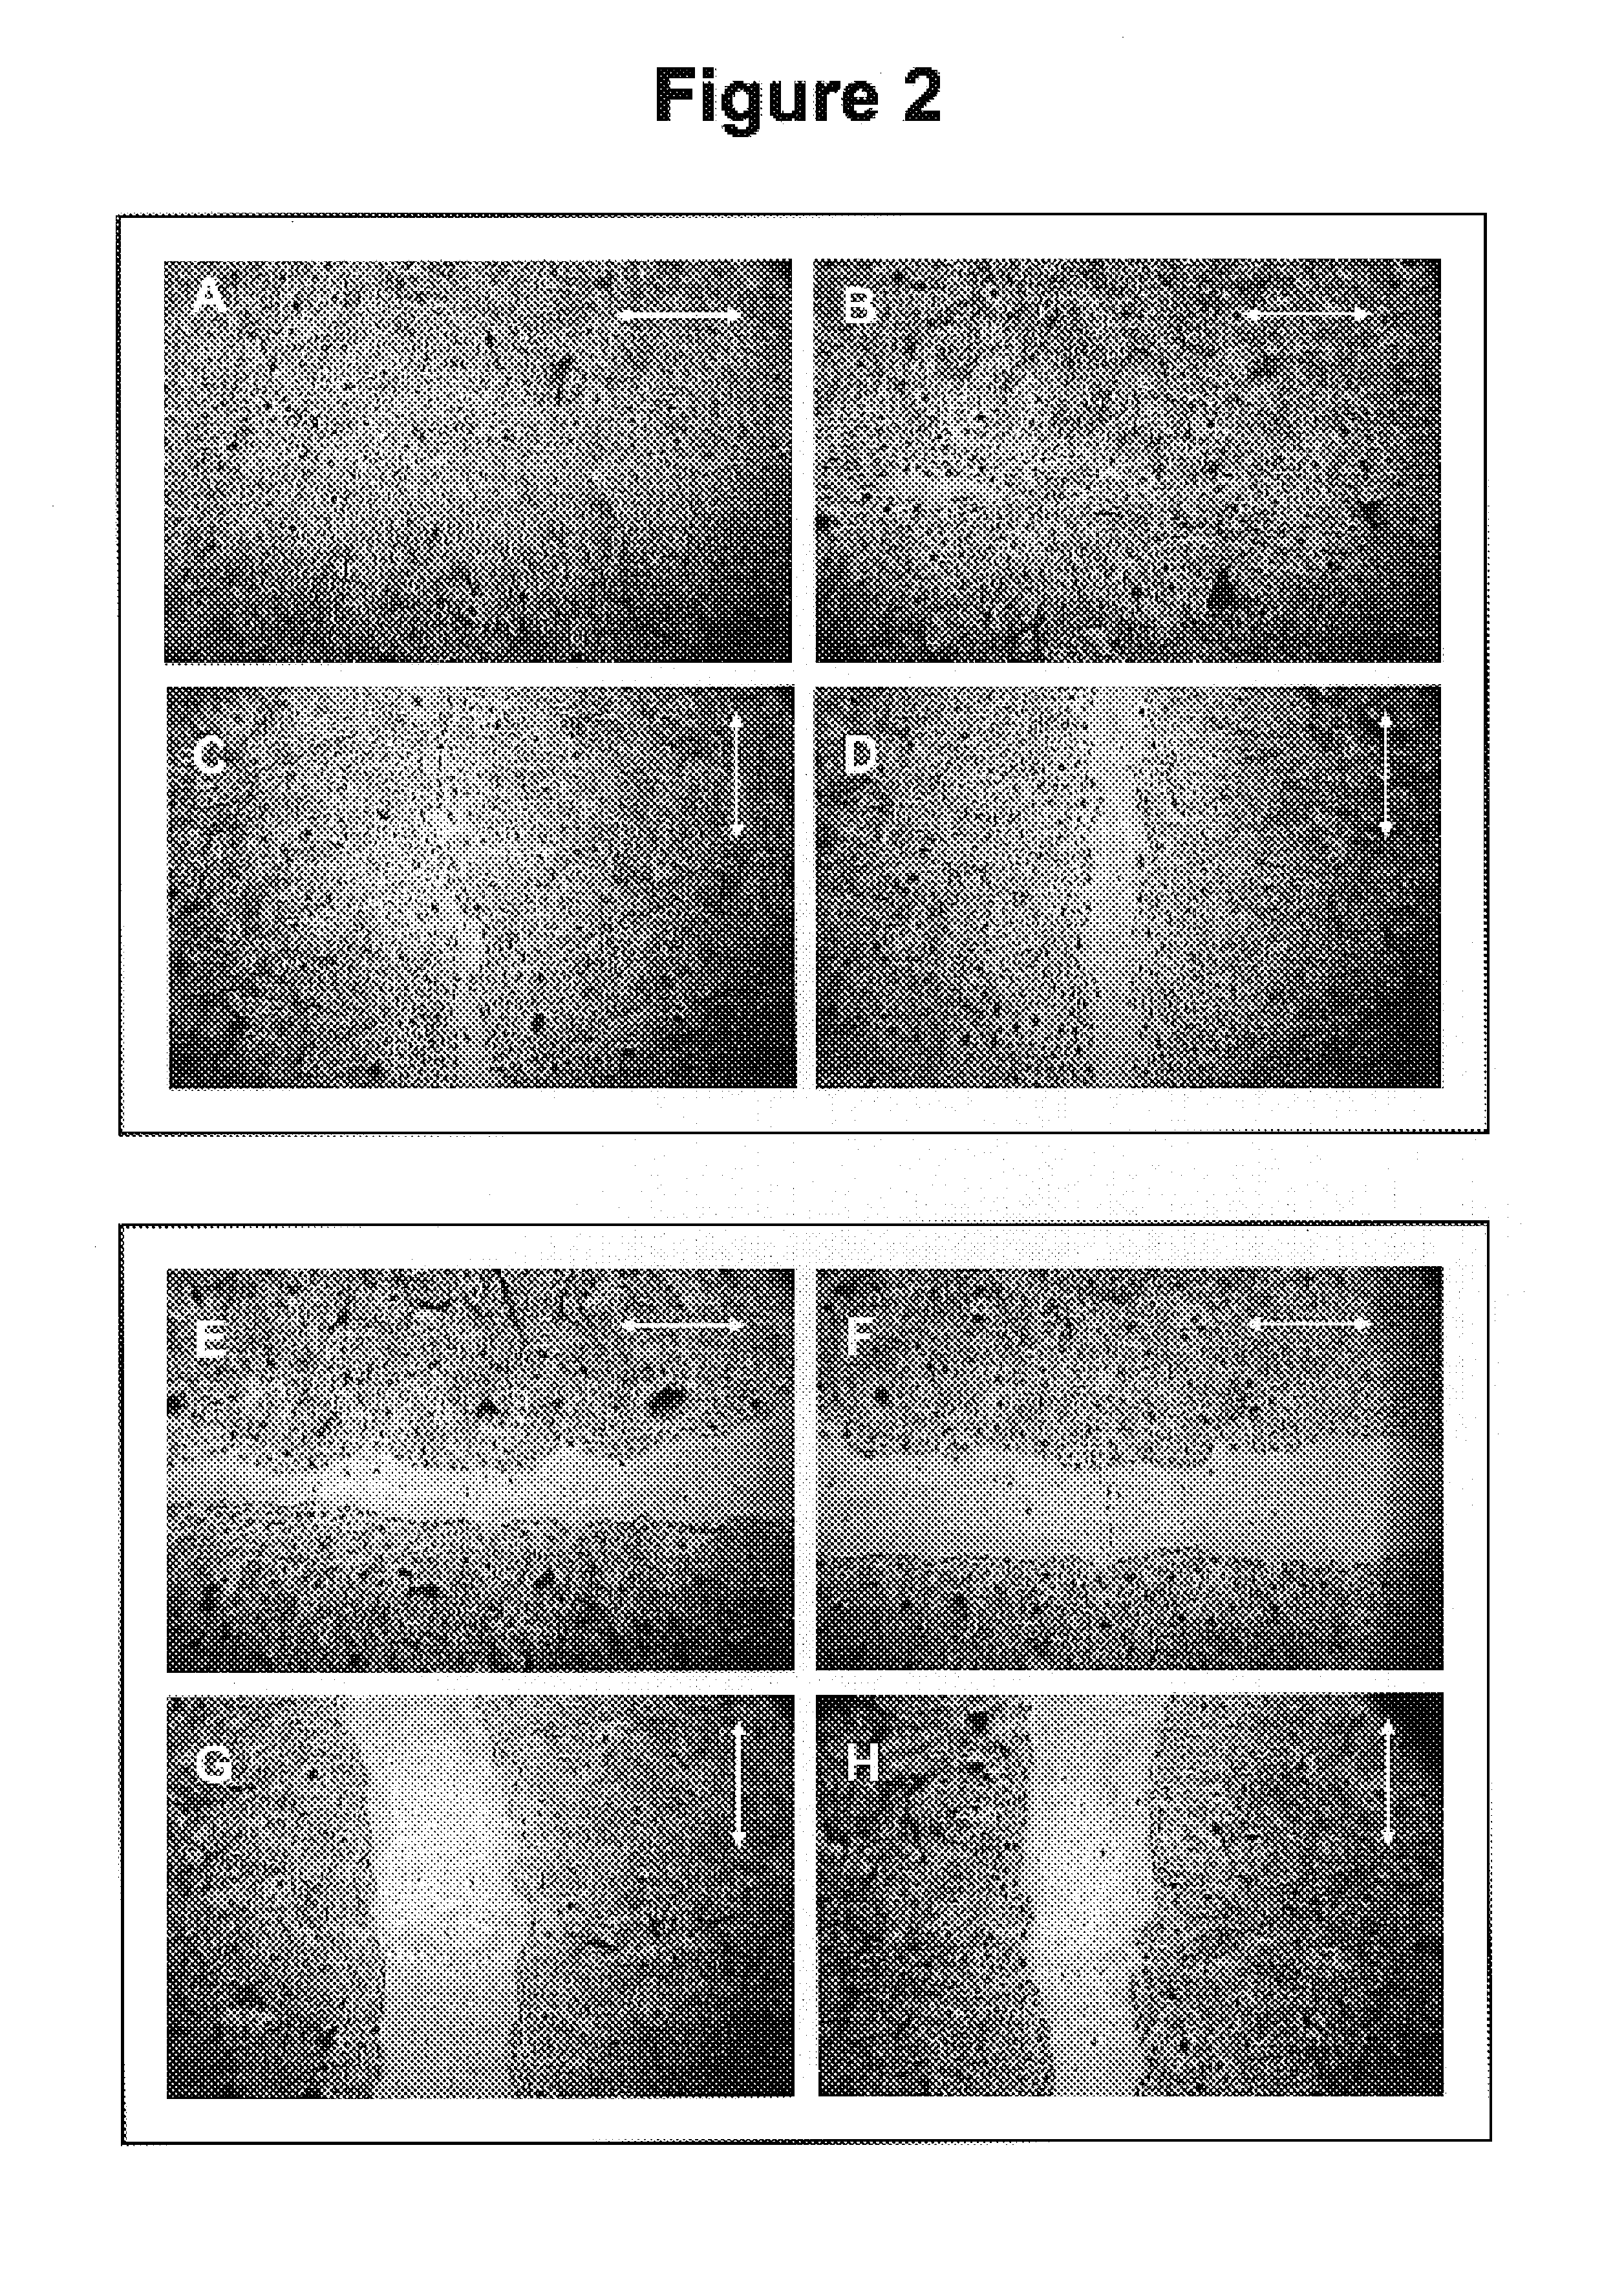 Methods for inhibiting cancer and scar formation